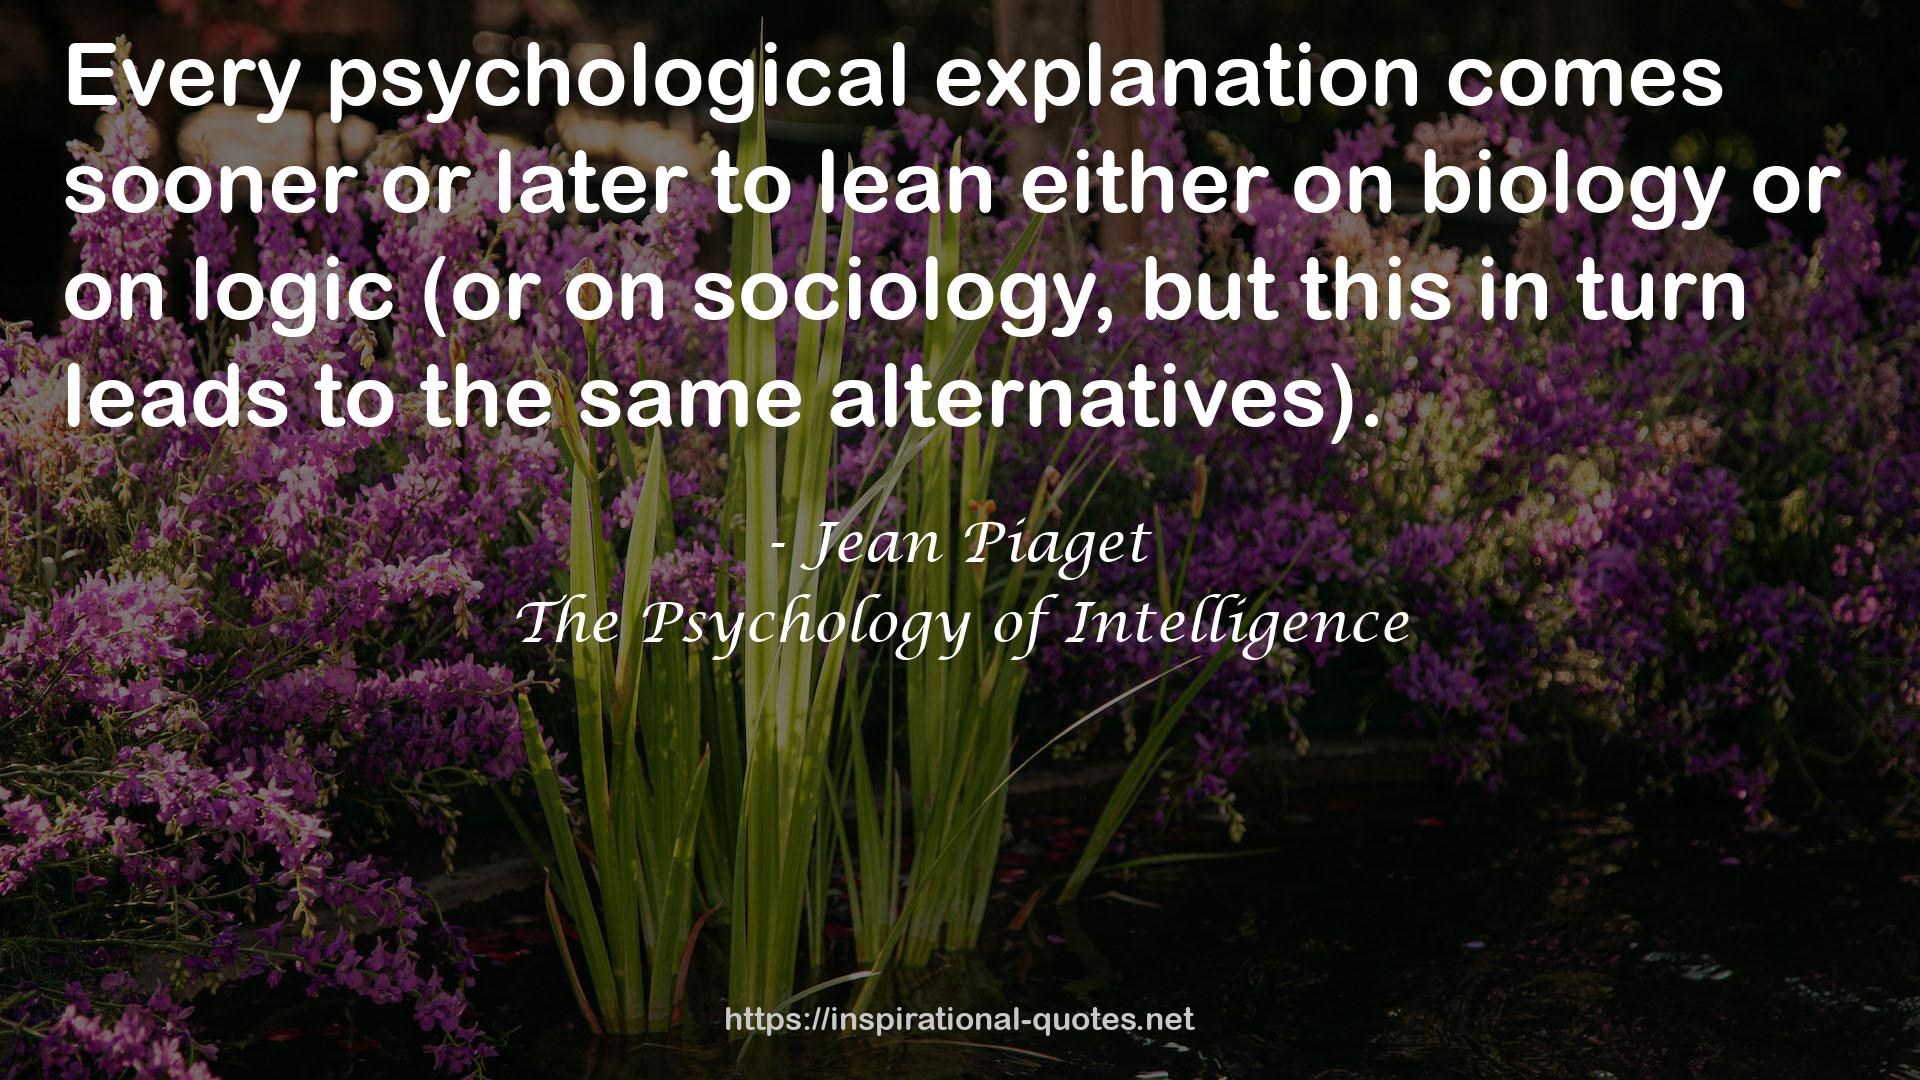 Jean Piaget QUOTES